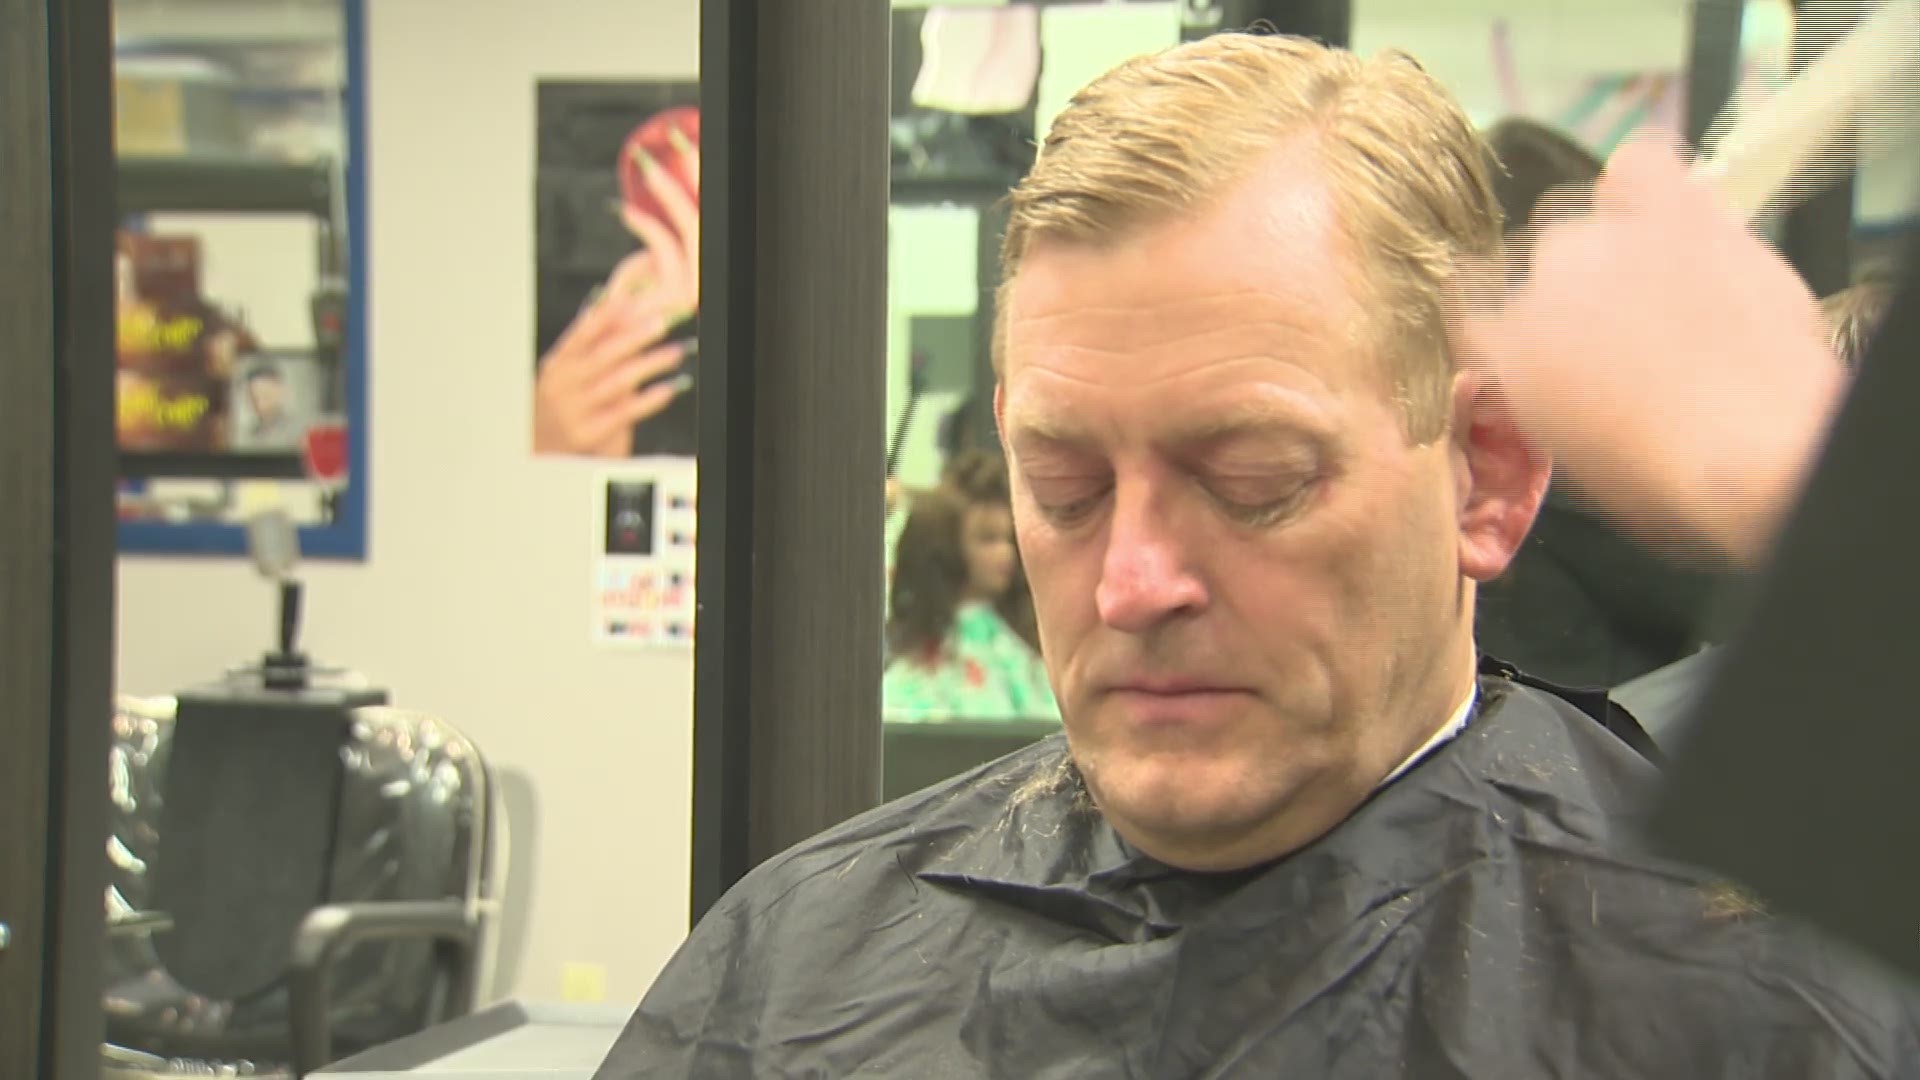 At Hays High School in Buda, students are getting a jump start on their future. through their cosmetology program.